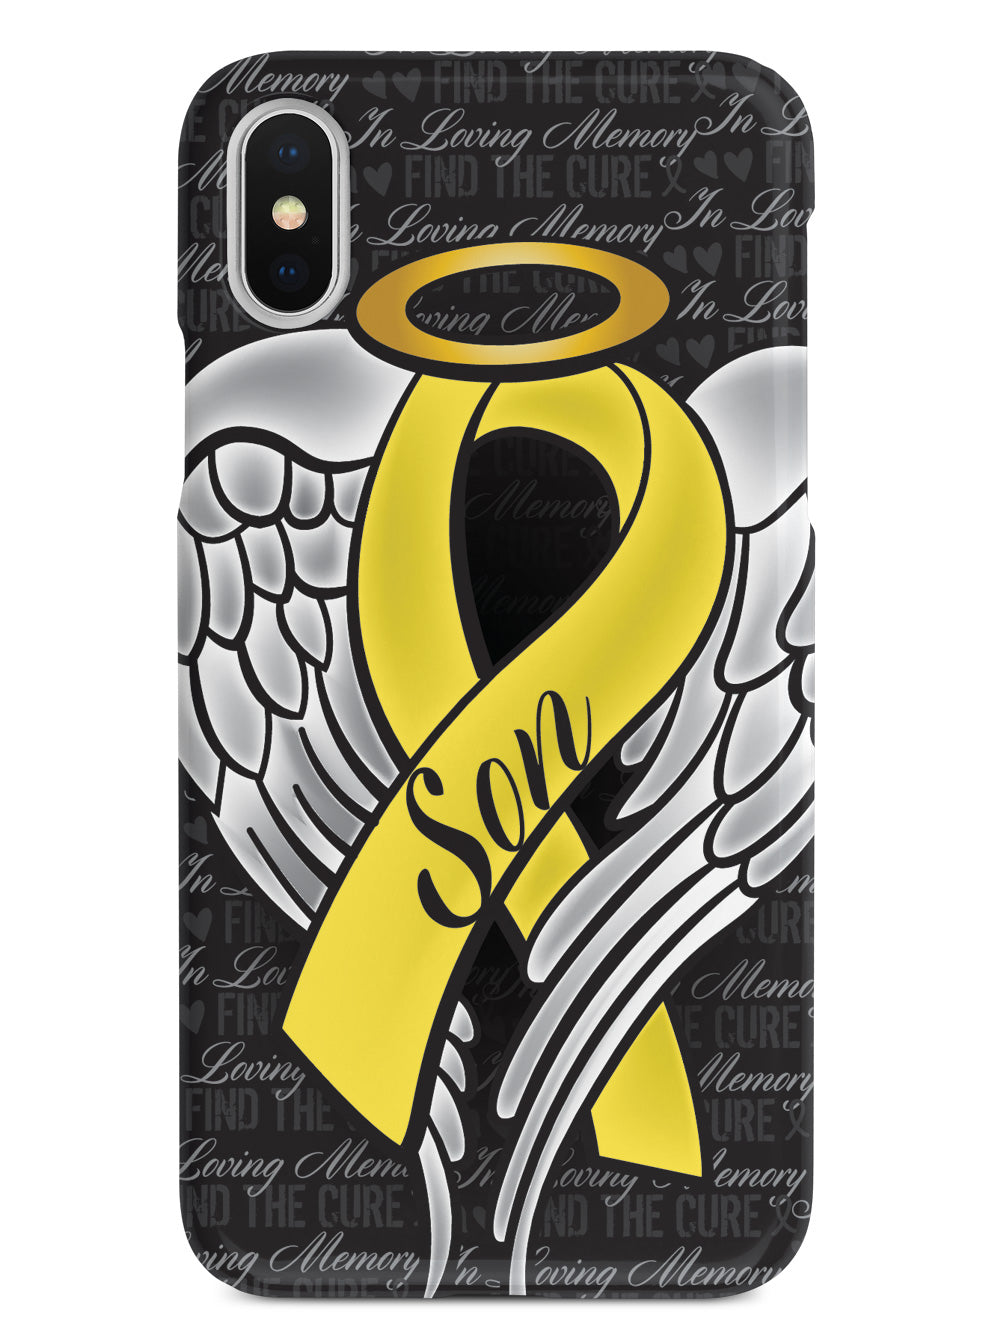 In Loving Memory of My Son - Yellow Ribbon Case